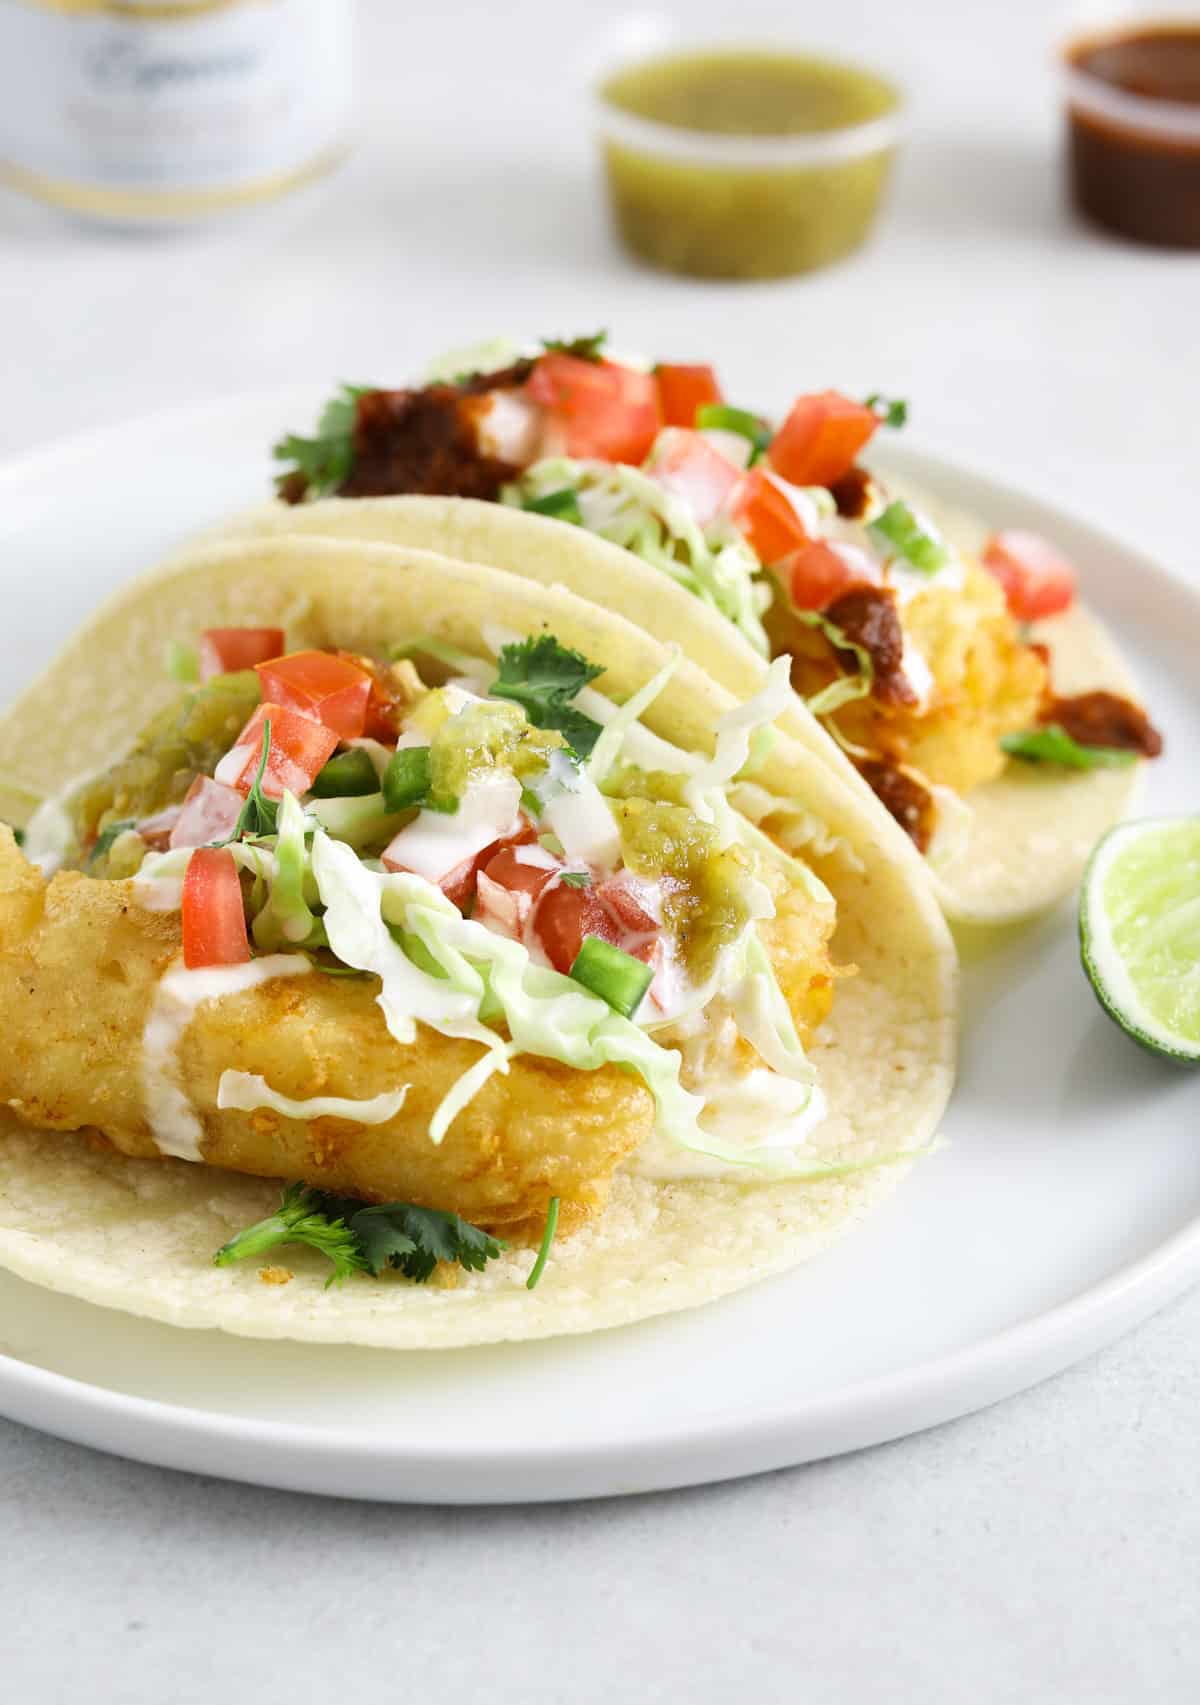 A close up image of a fried fish taco topped with cabbage slaw, diced tomatoes, and salsa.